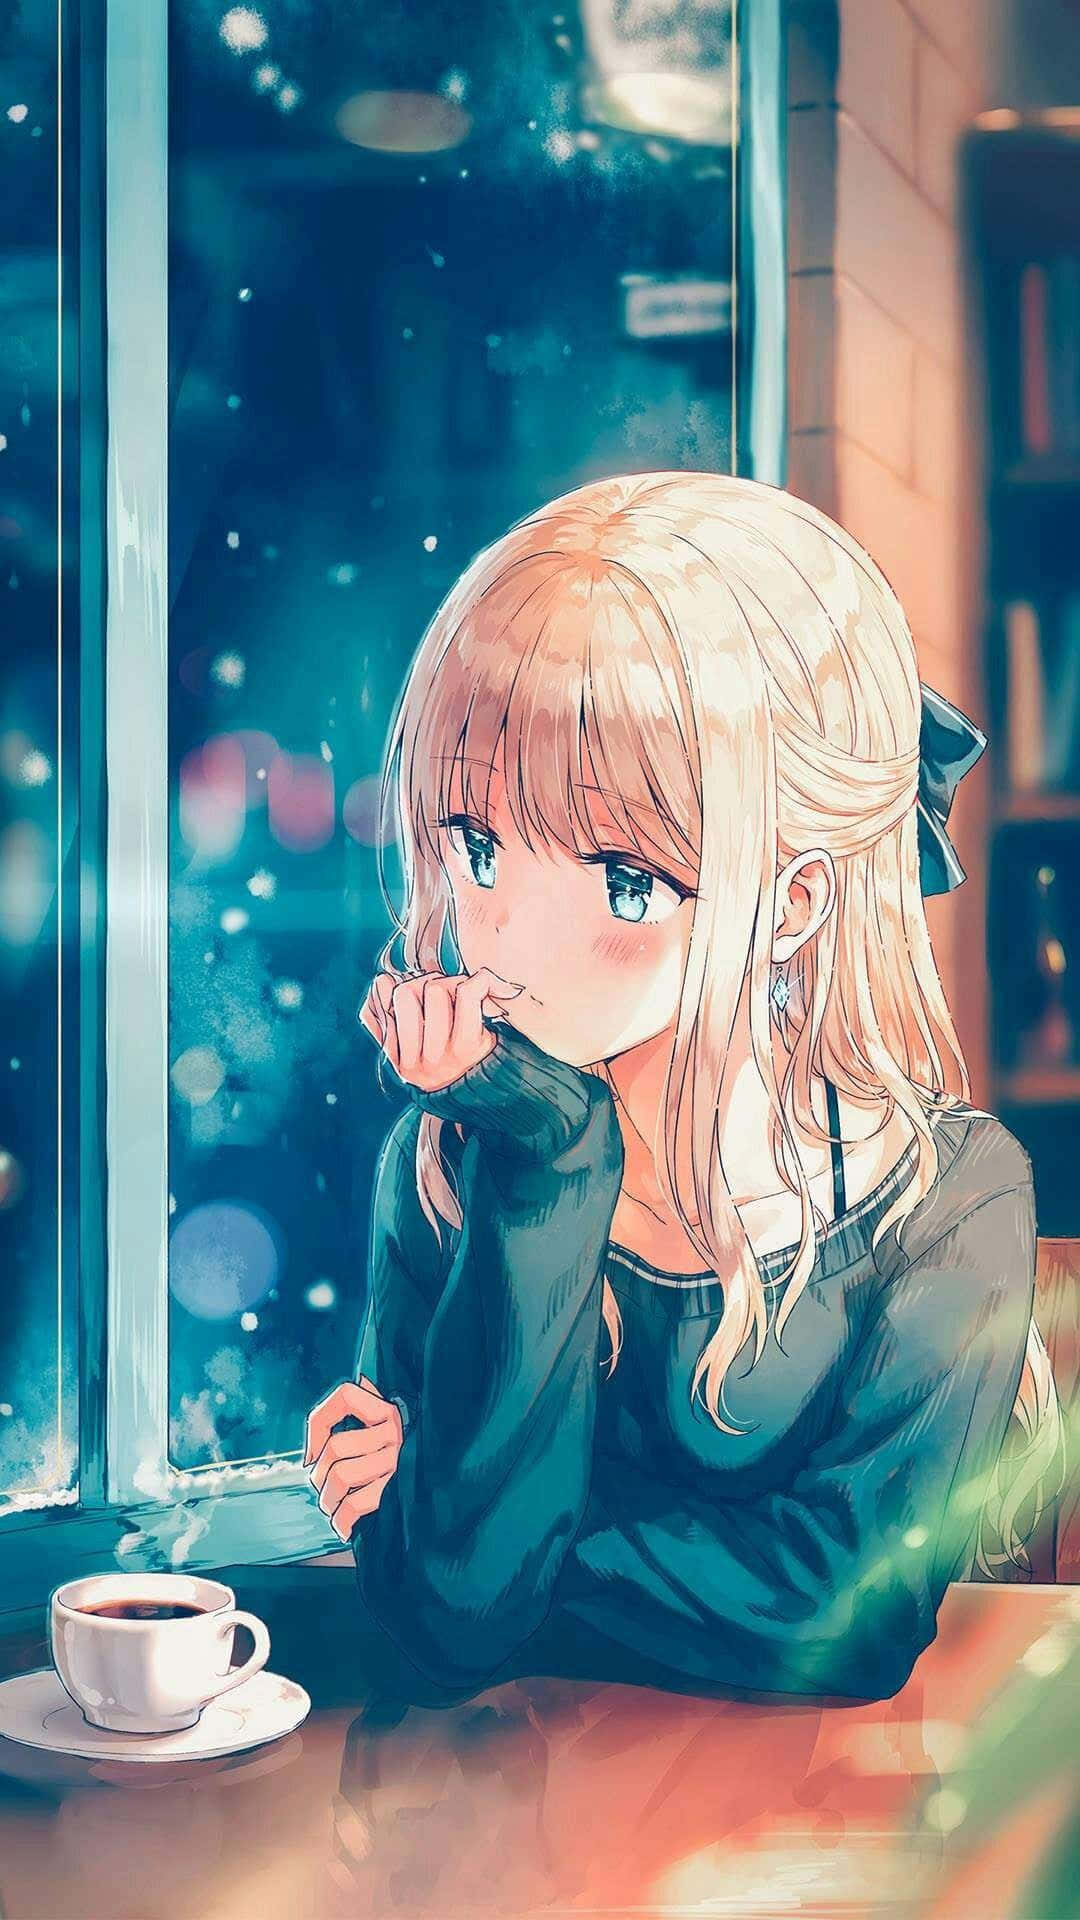 A lonely Anime character shedding a tear. Wallpaper